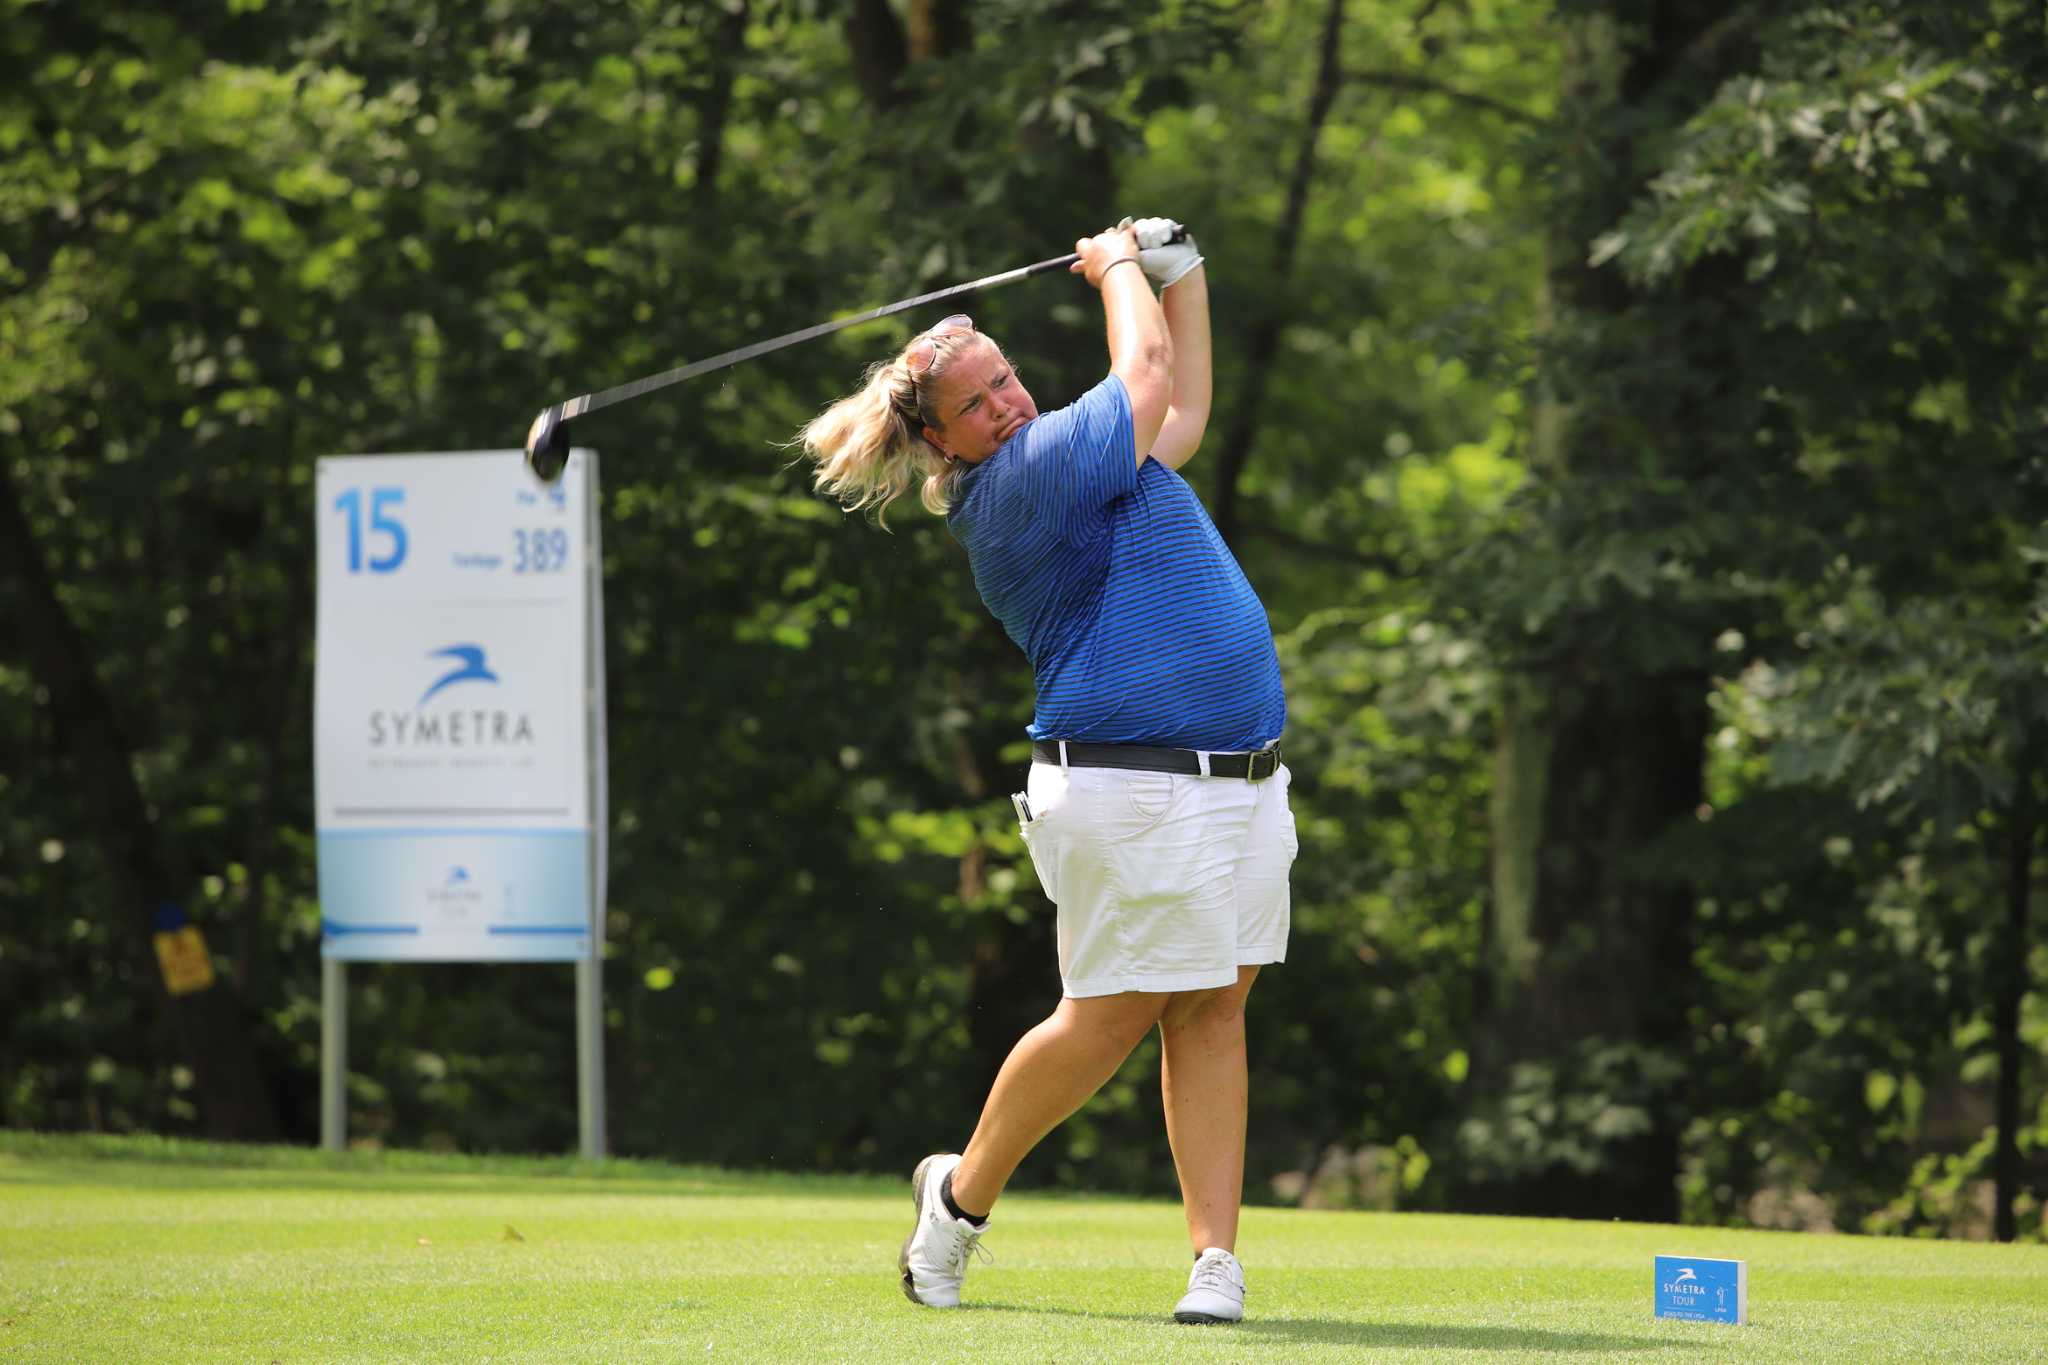 UAlbany coach, Siena player given exemptions for local Symetra Tour event picture